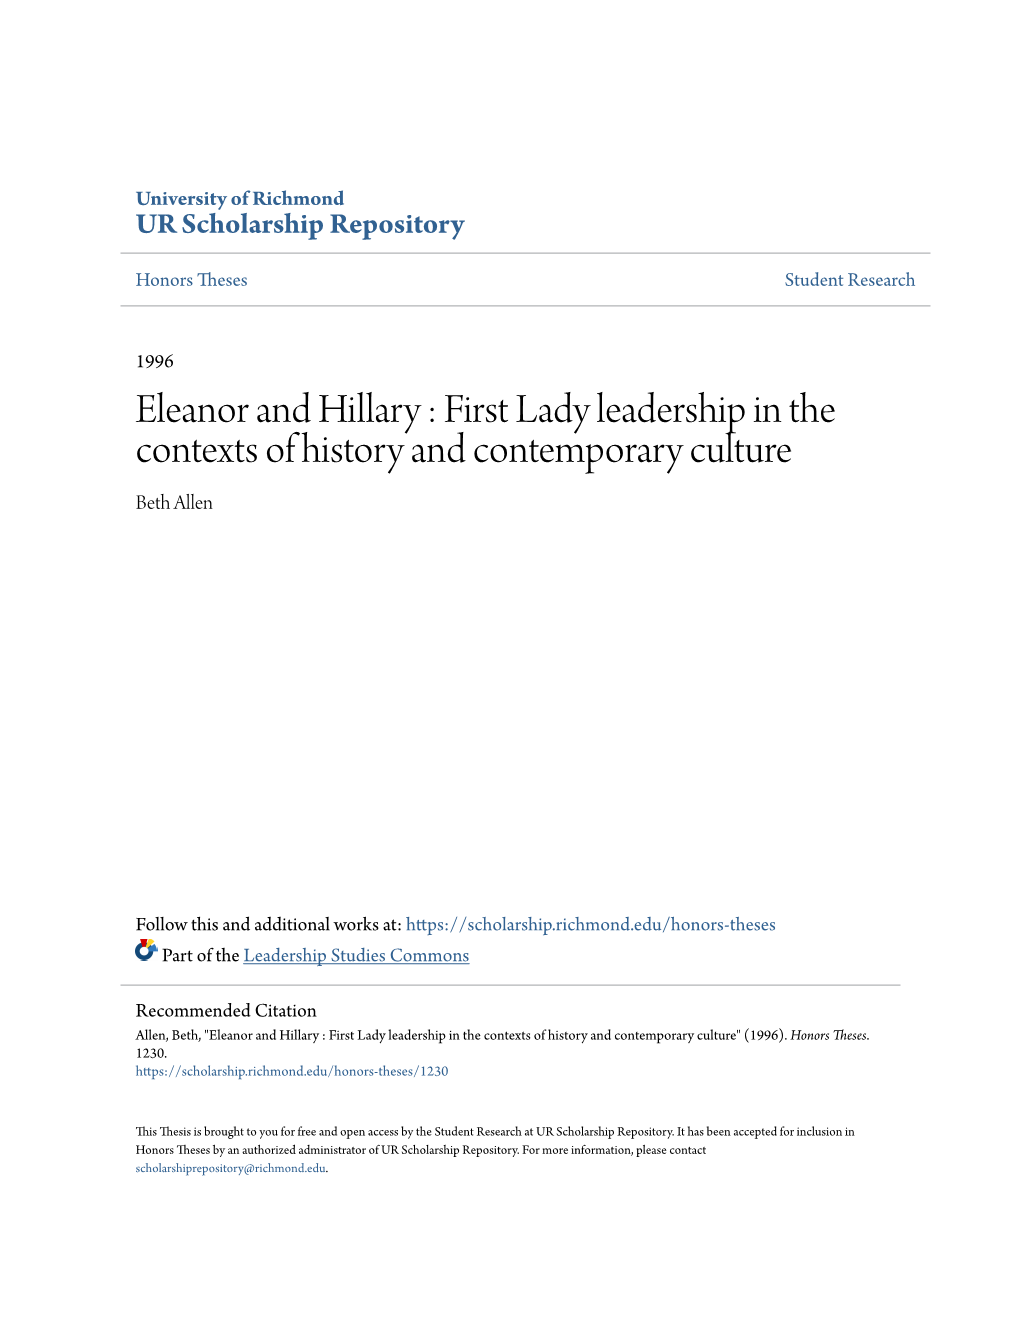 Eleanor and Hillary : First Lady Leadership in the Contexts of History and Contemporary Culture Beth Allen